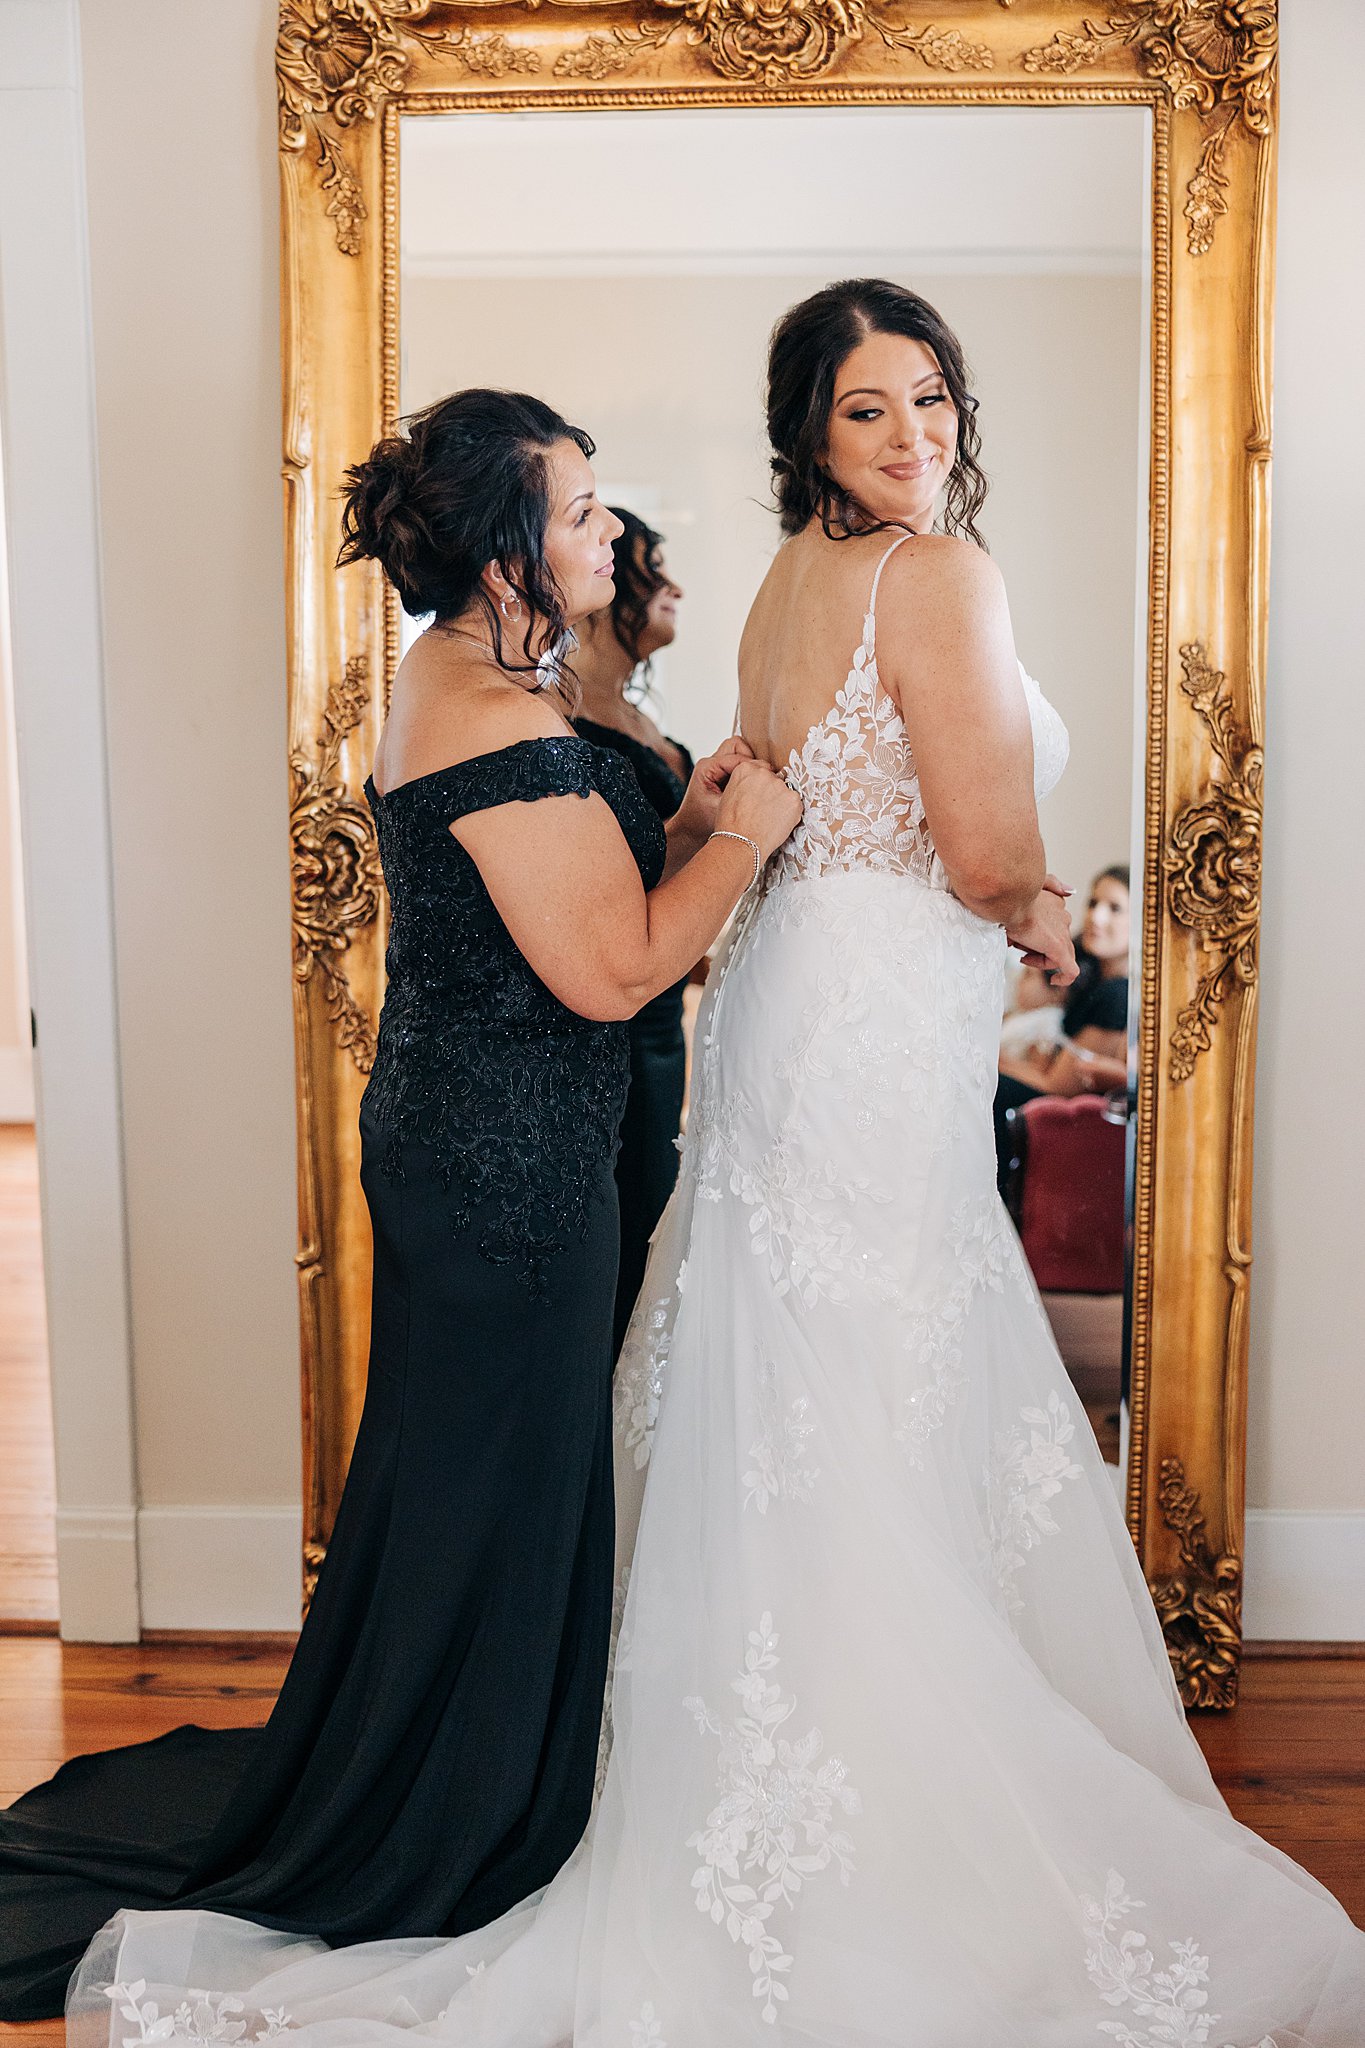 A bride has help buttoning her dress while standing in a mirror